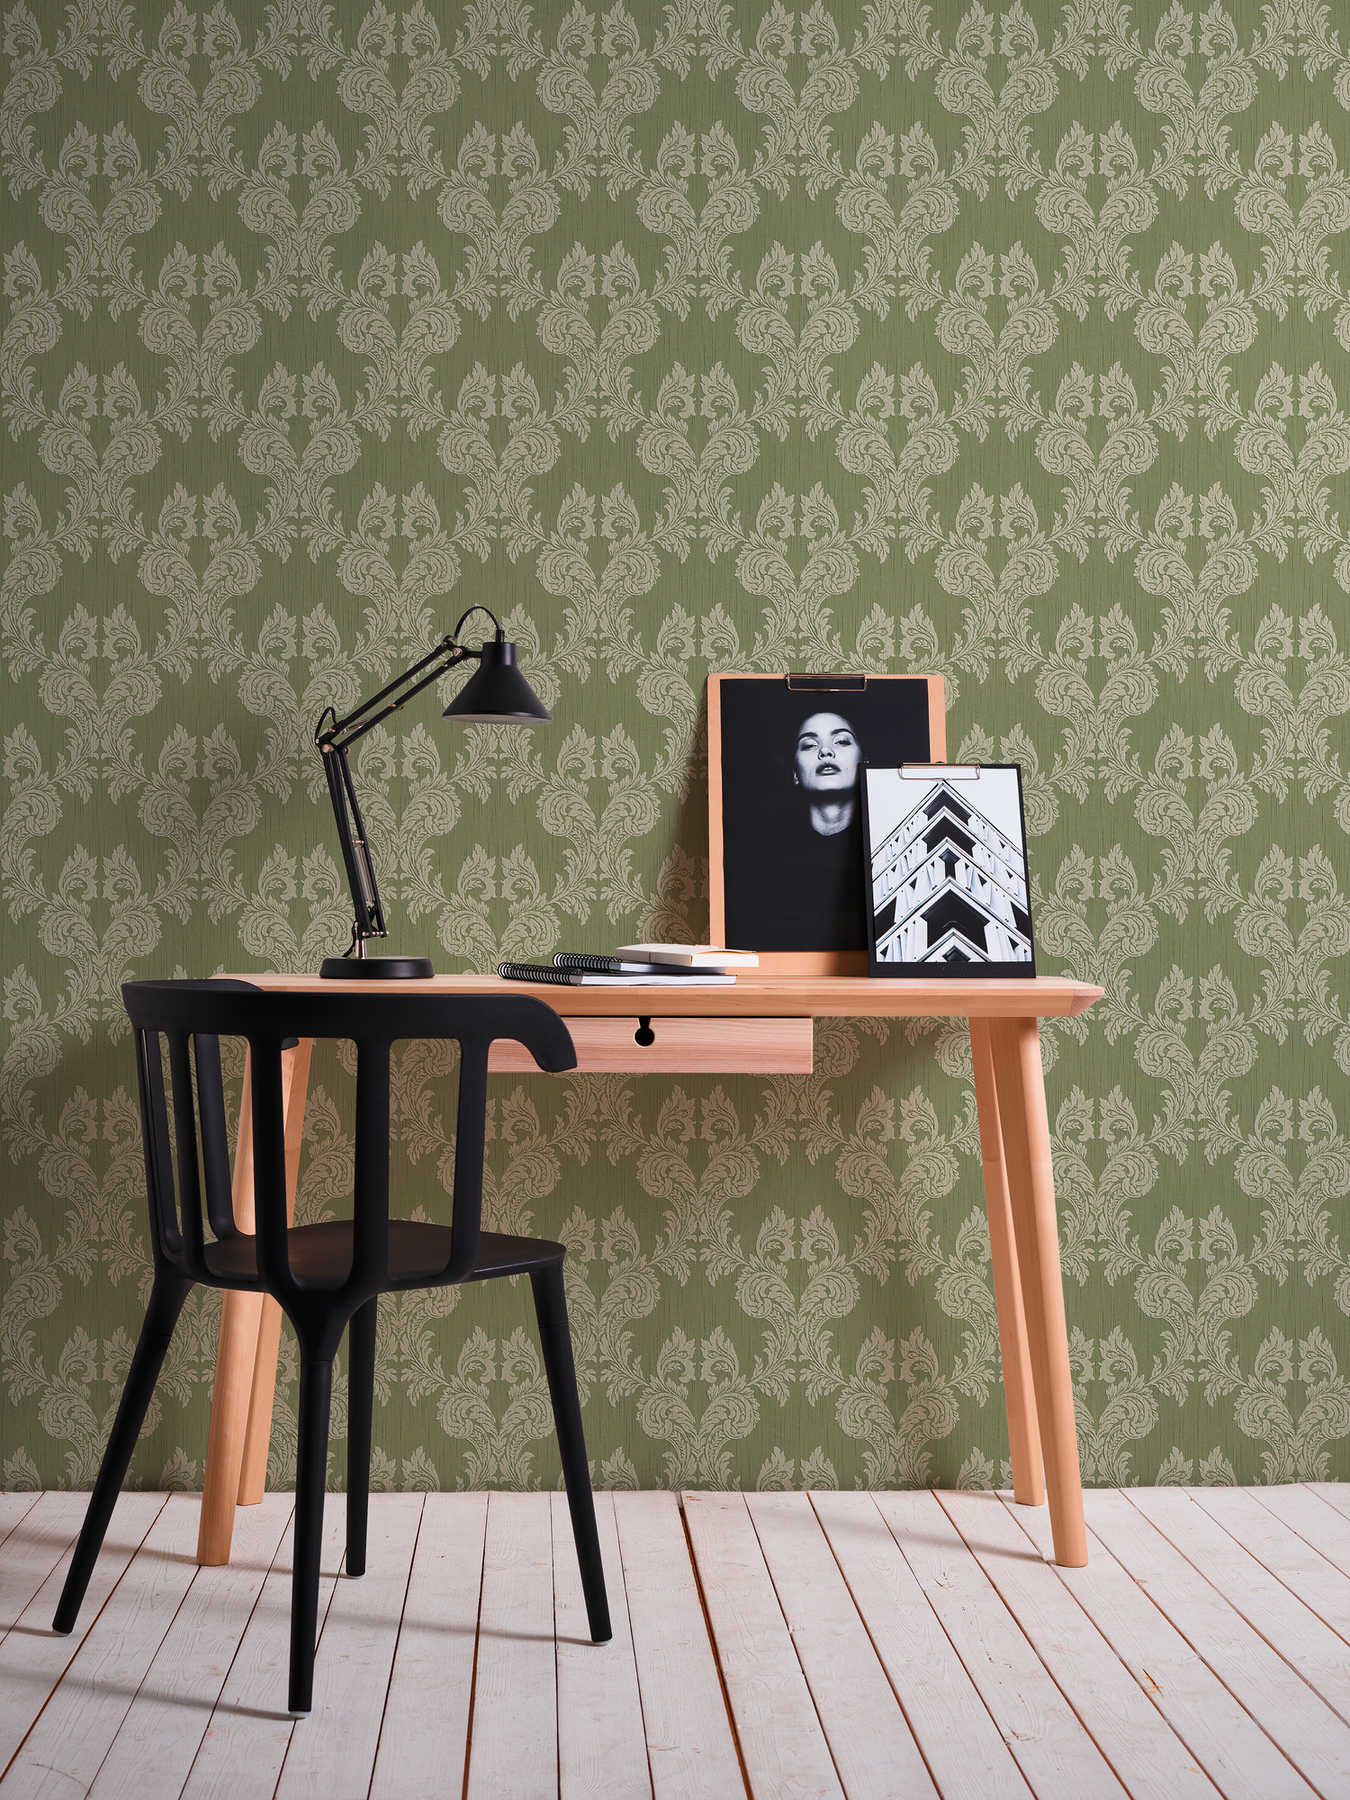             Ornamental wallpaper with floral pattern & texture effect - green
        